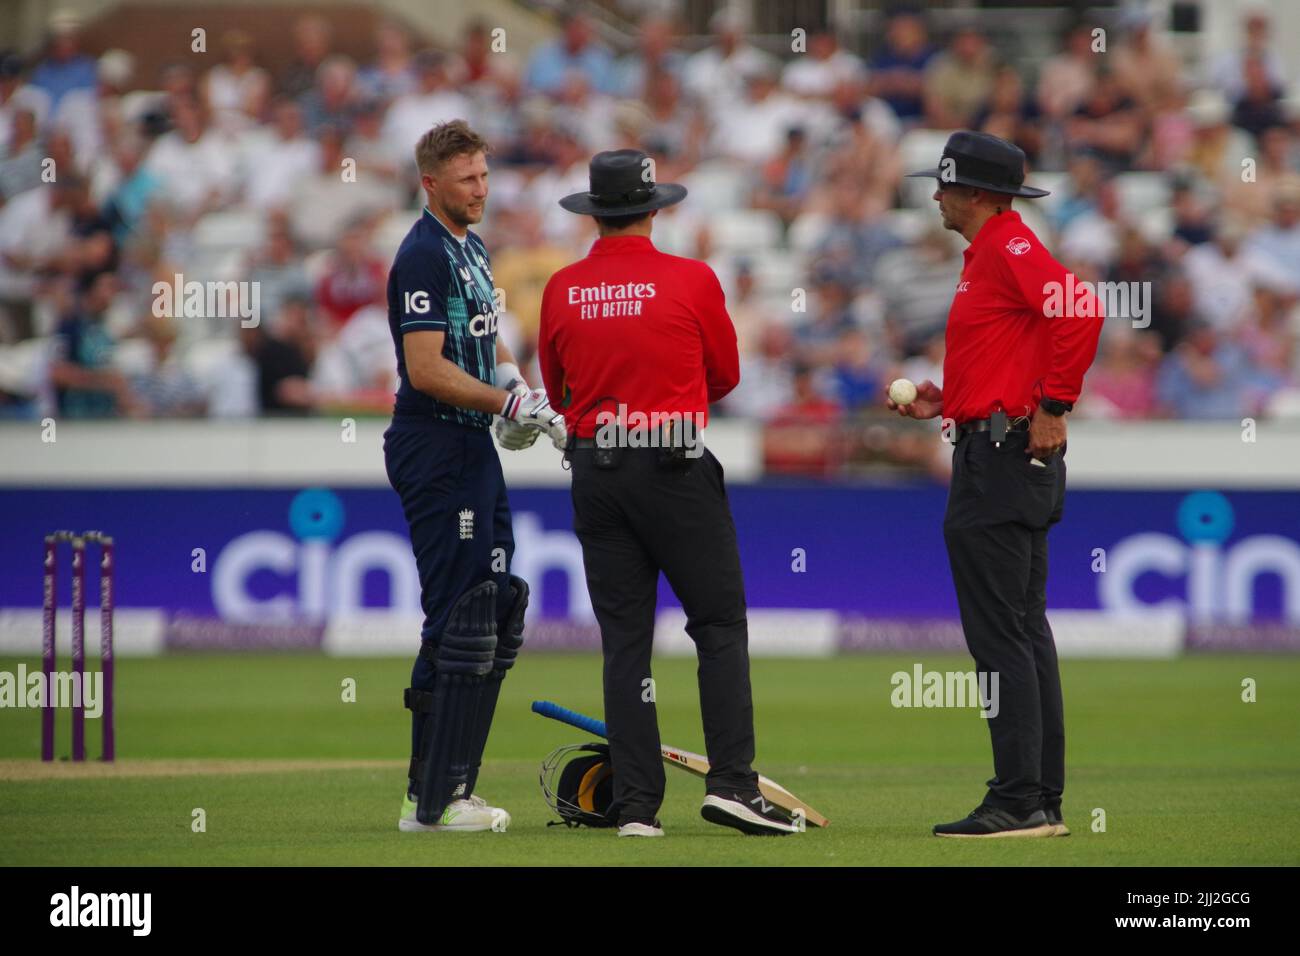 Chester le Street, England, 19 July 2022. Joe Root talking to umpires Mike Burns and Richard Kettleborough at the fall of a wicket during the First Royal London One Day International between England and South Africa at The Seat Unique Riverside. Credit: Colin Edwards Stock Photo